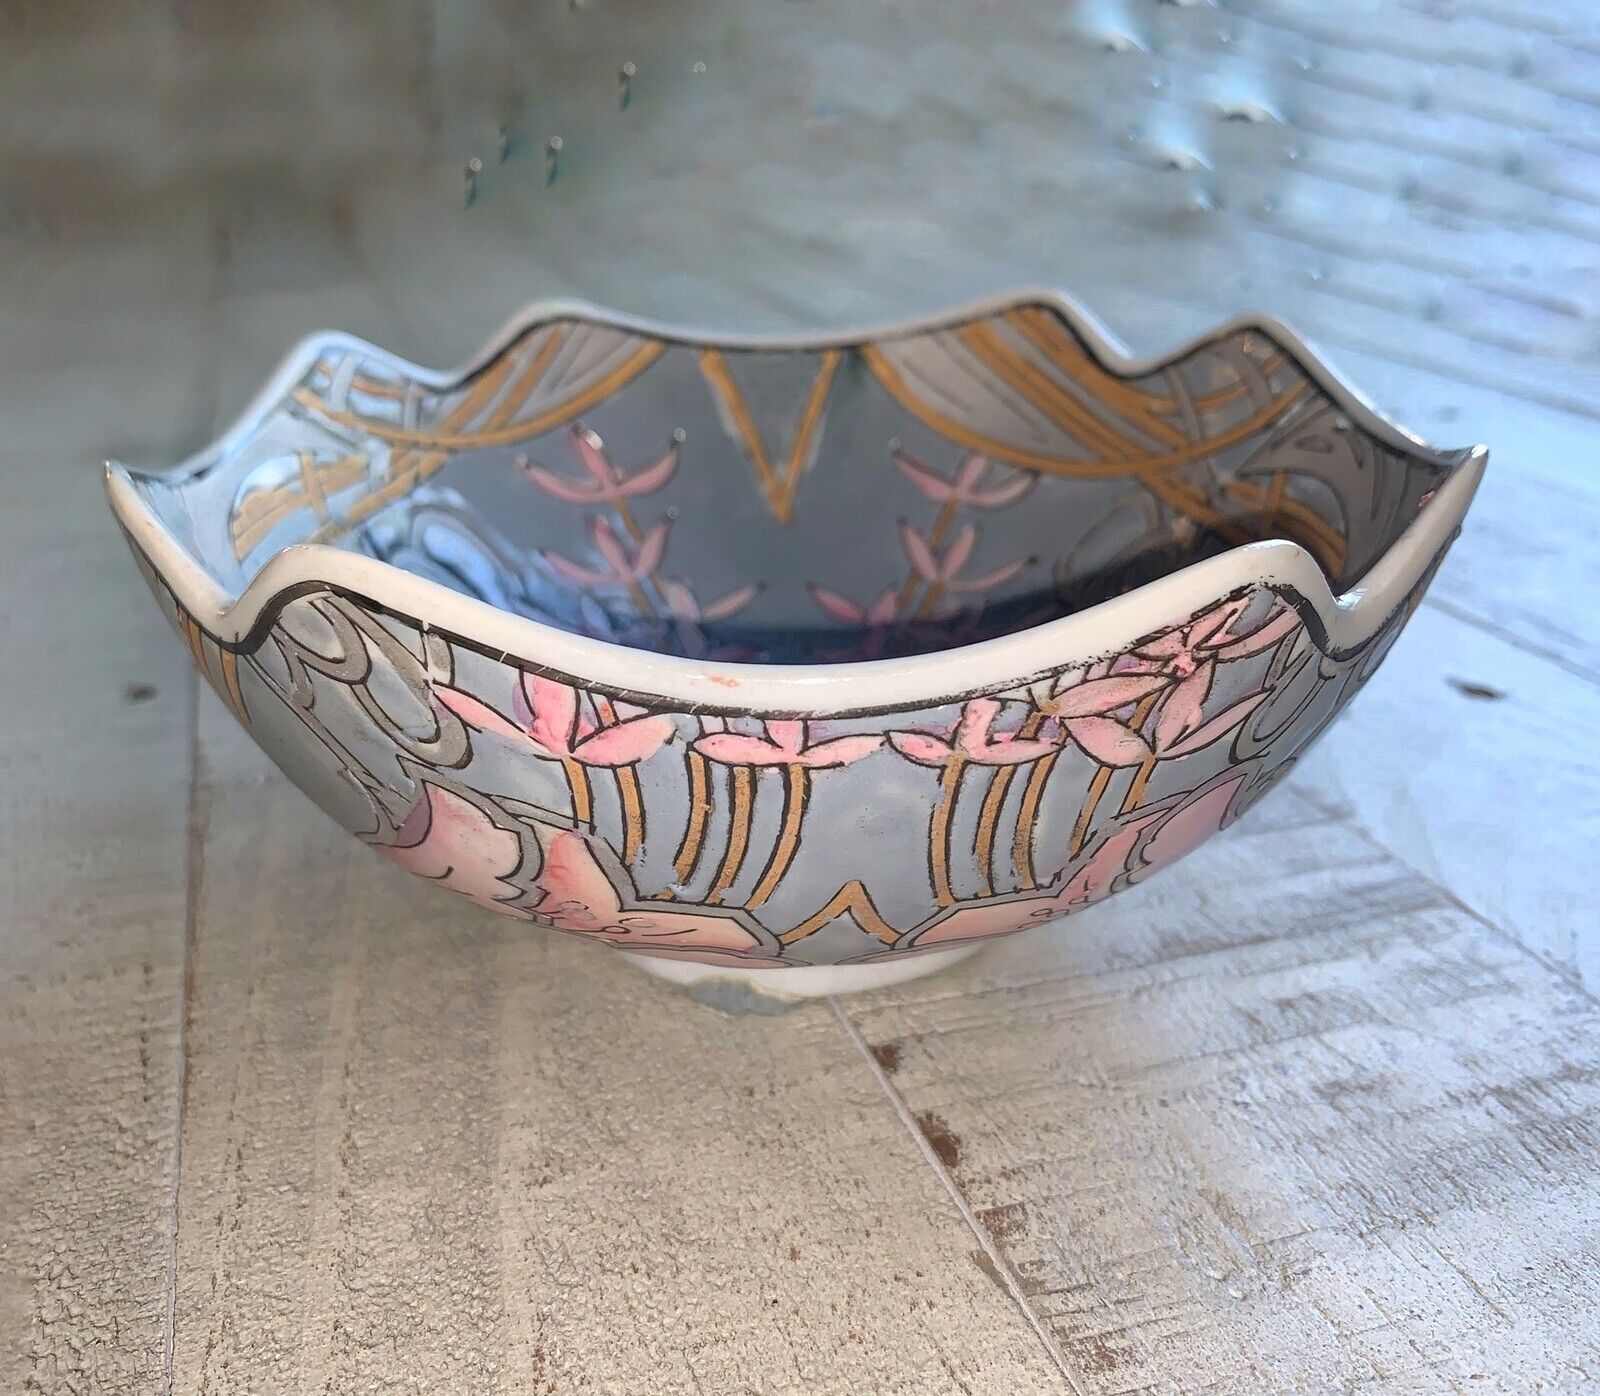 VTG Macau Chinese Porcelain Bowl Painted Scalloped Square Decorative Candy 6”